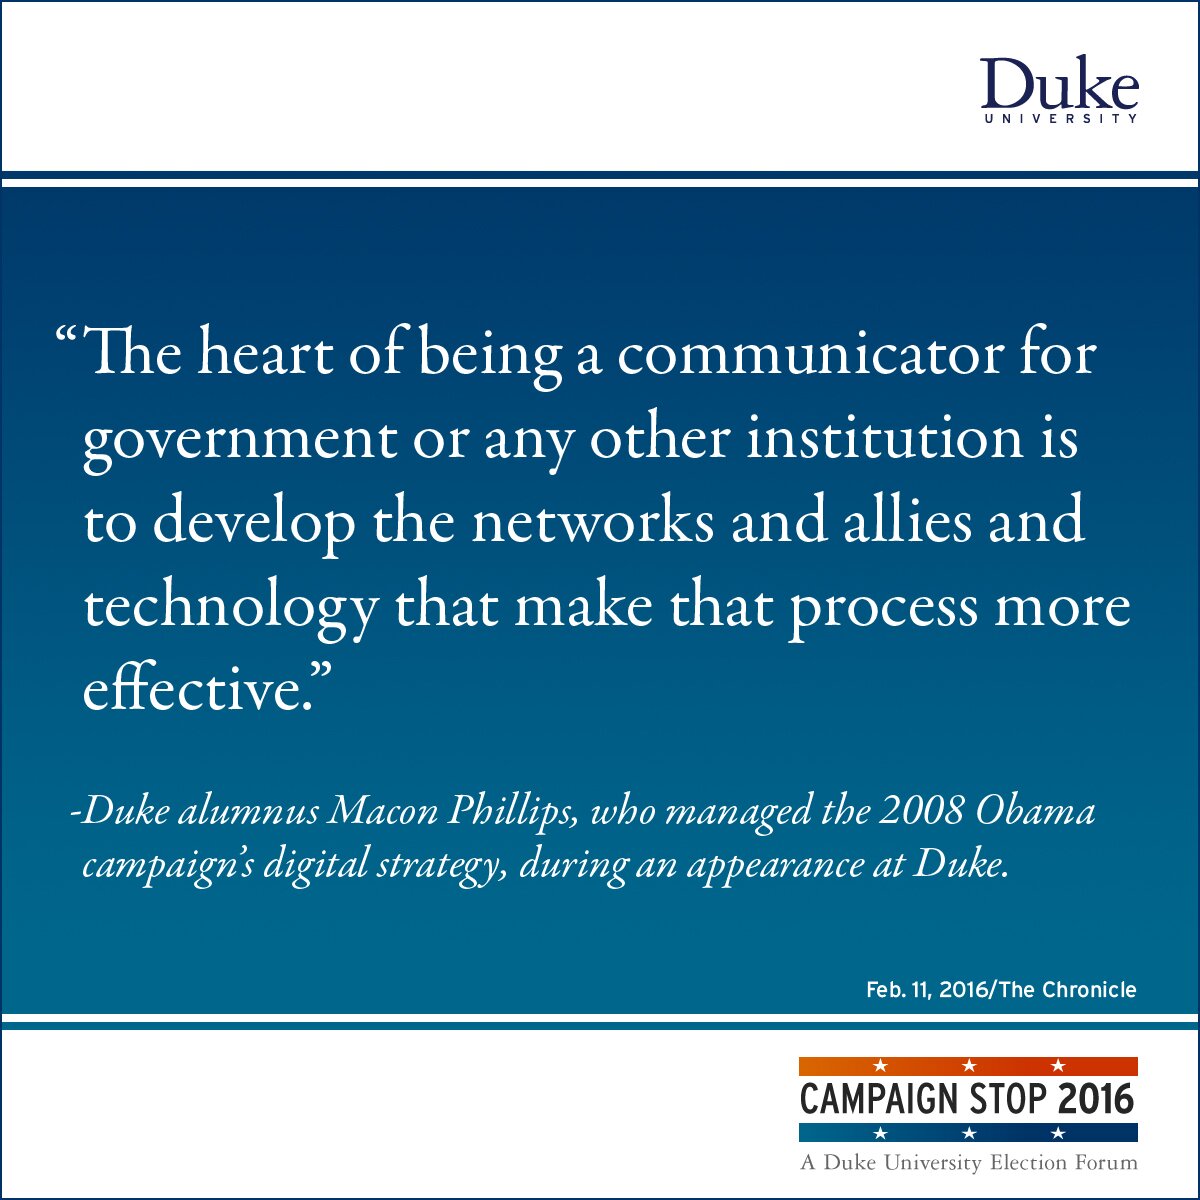 The heart of being a communicator for government or any other institution is to develop the networks and allies and technology that make that process more effective. -- Duke alumnus Macon Phillips, who managed the 2008 Obama campaign’s digital strategy, during an appearance at Duke.